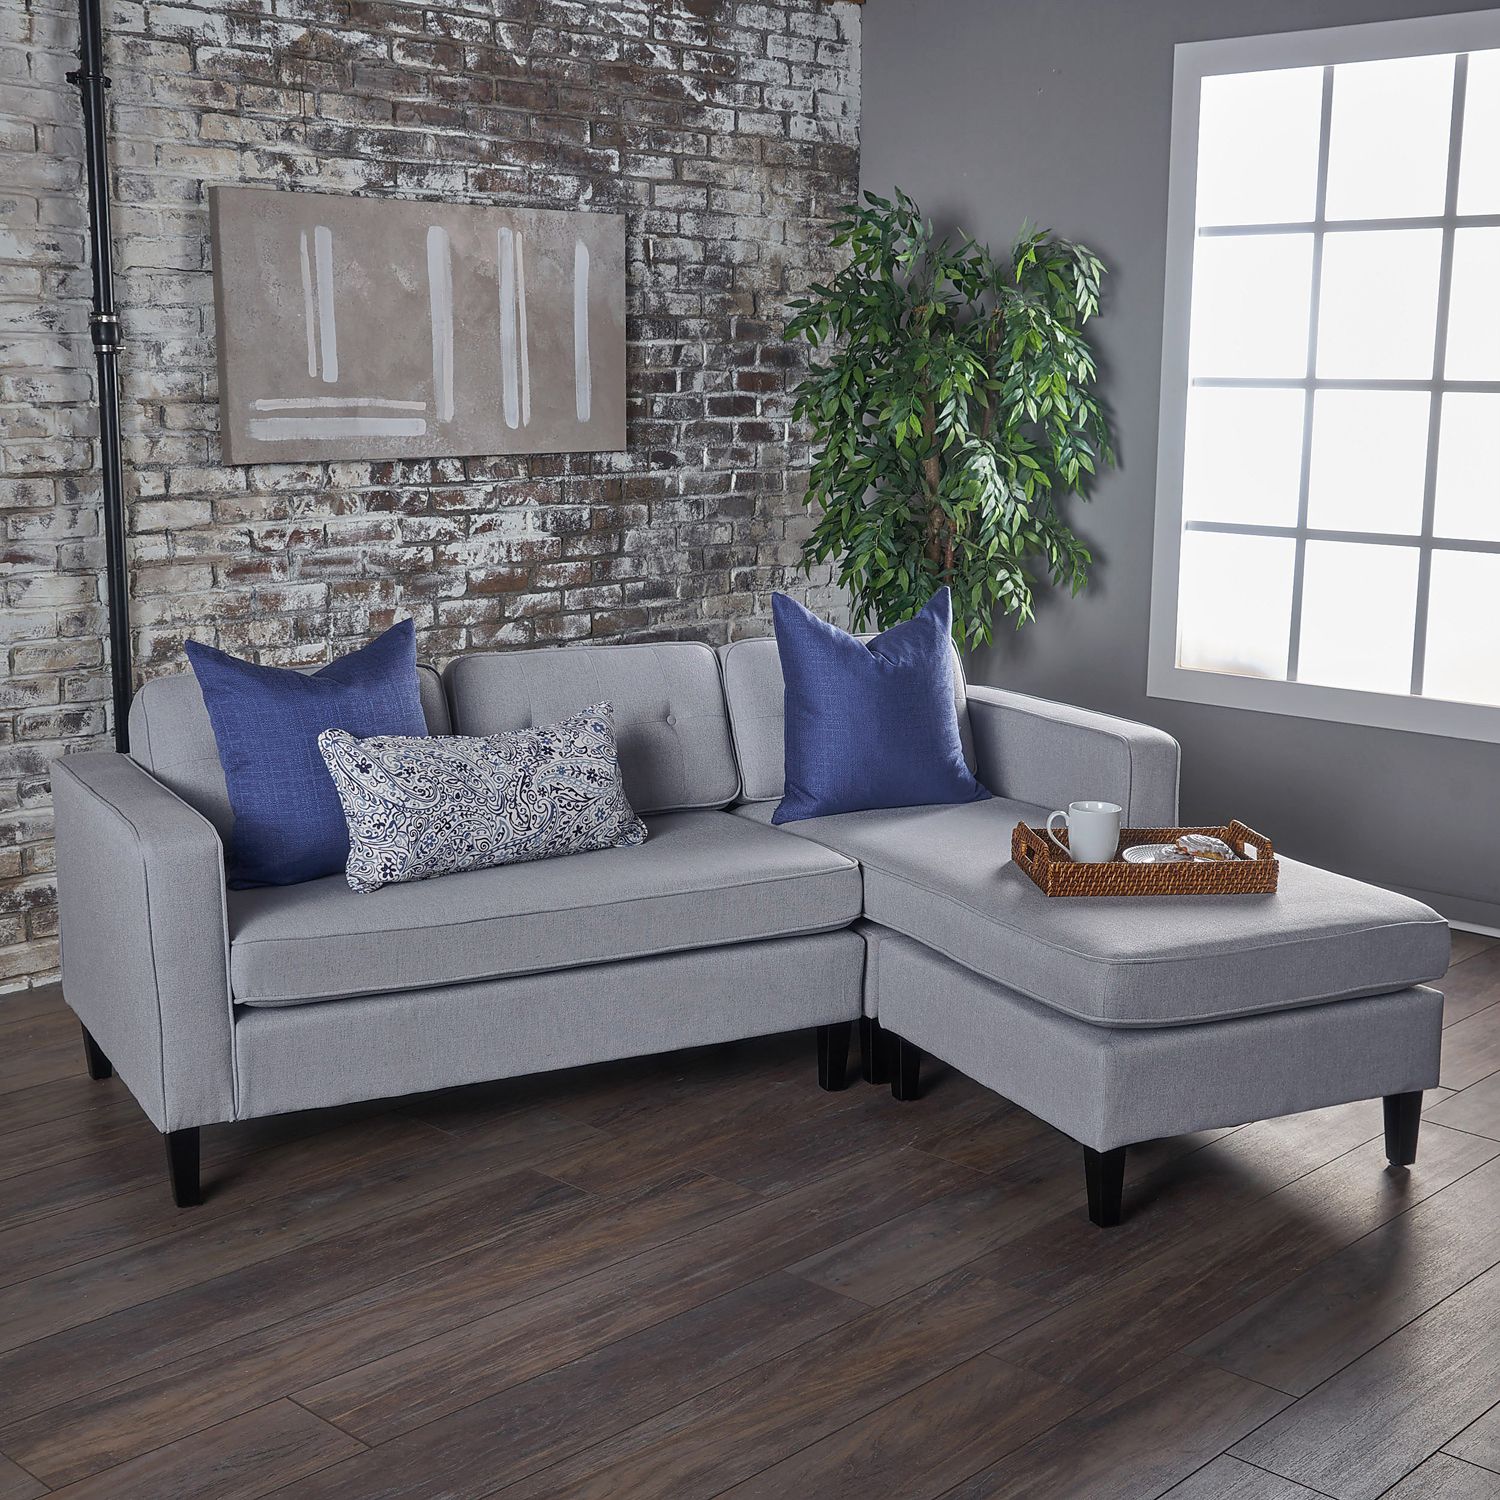 Light Gray Wilder Chaise Sectional Sofa – Pier1 Inside Sectional Sofas In Gray (View 4 of 15)